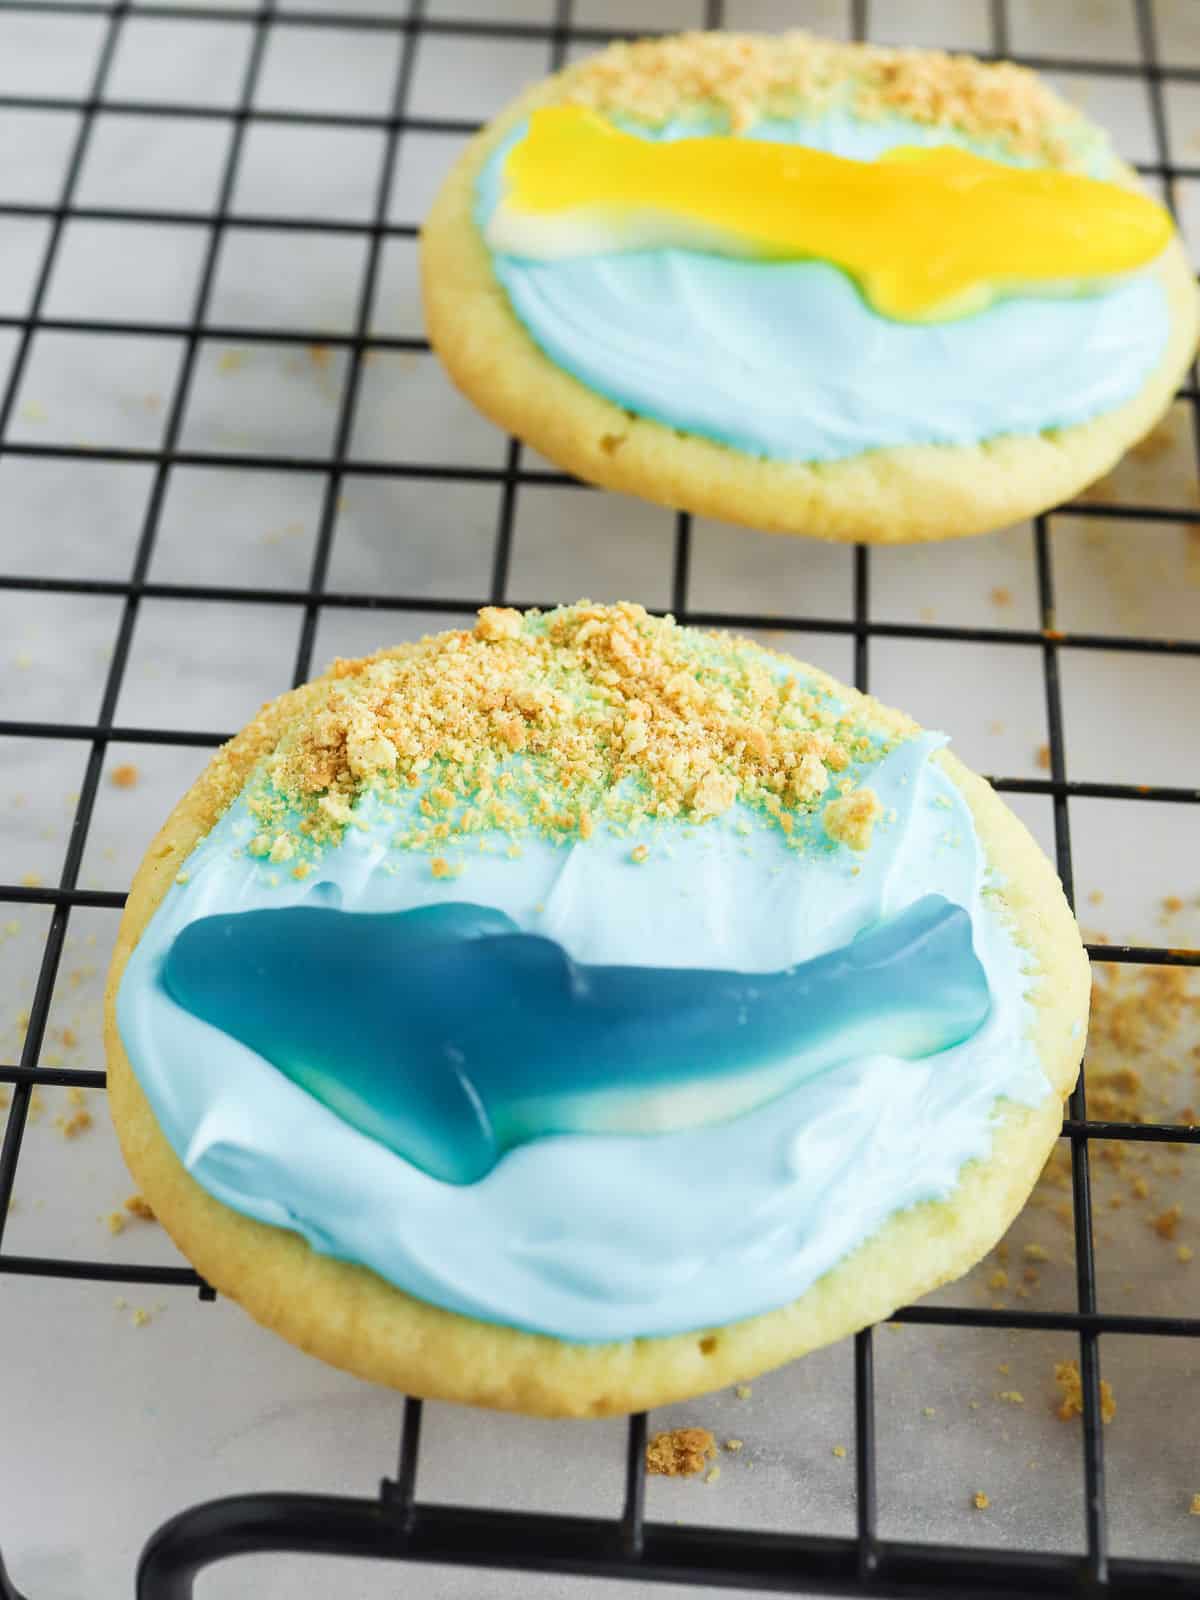 Two cookies decorated with blue and yellow icing on a cooling rack.